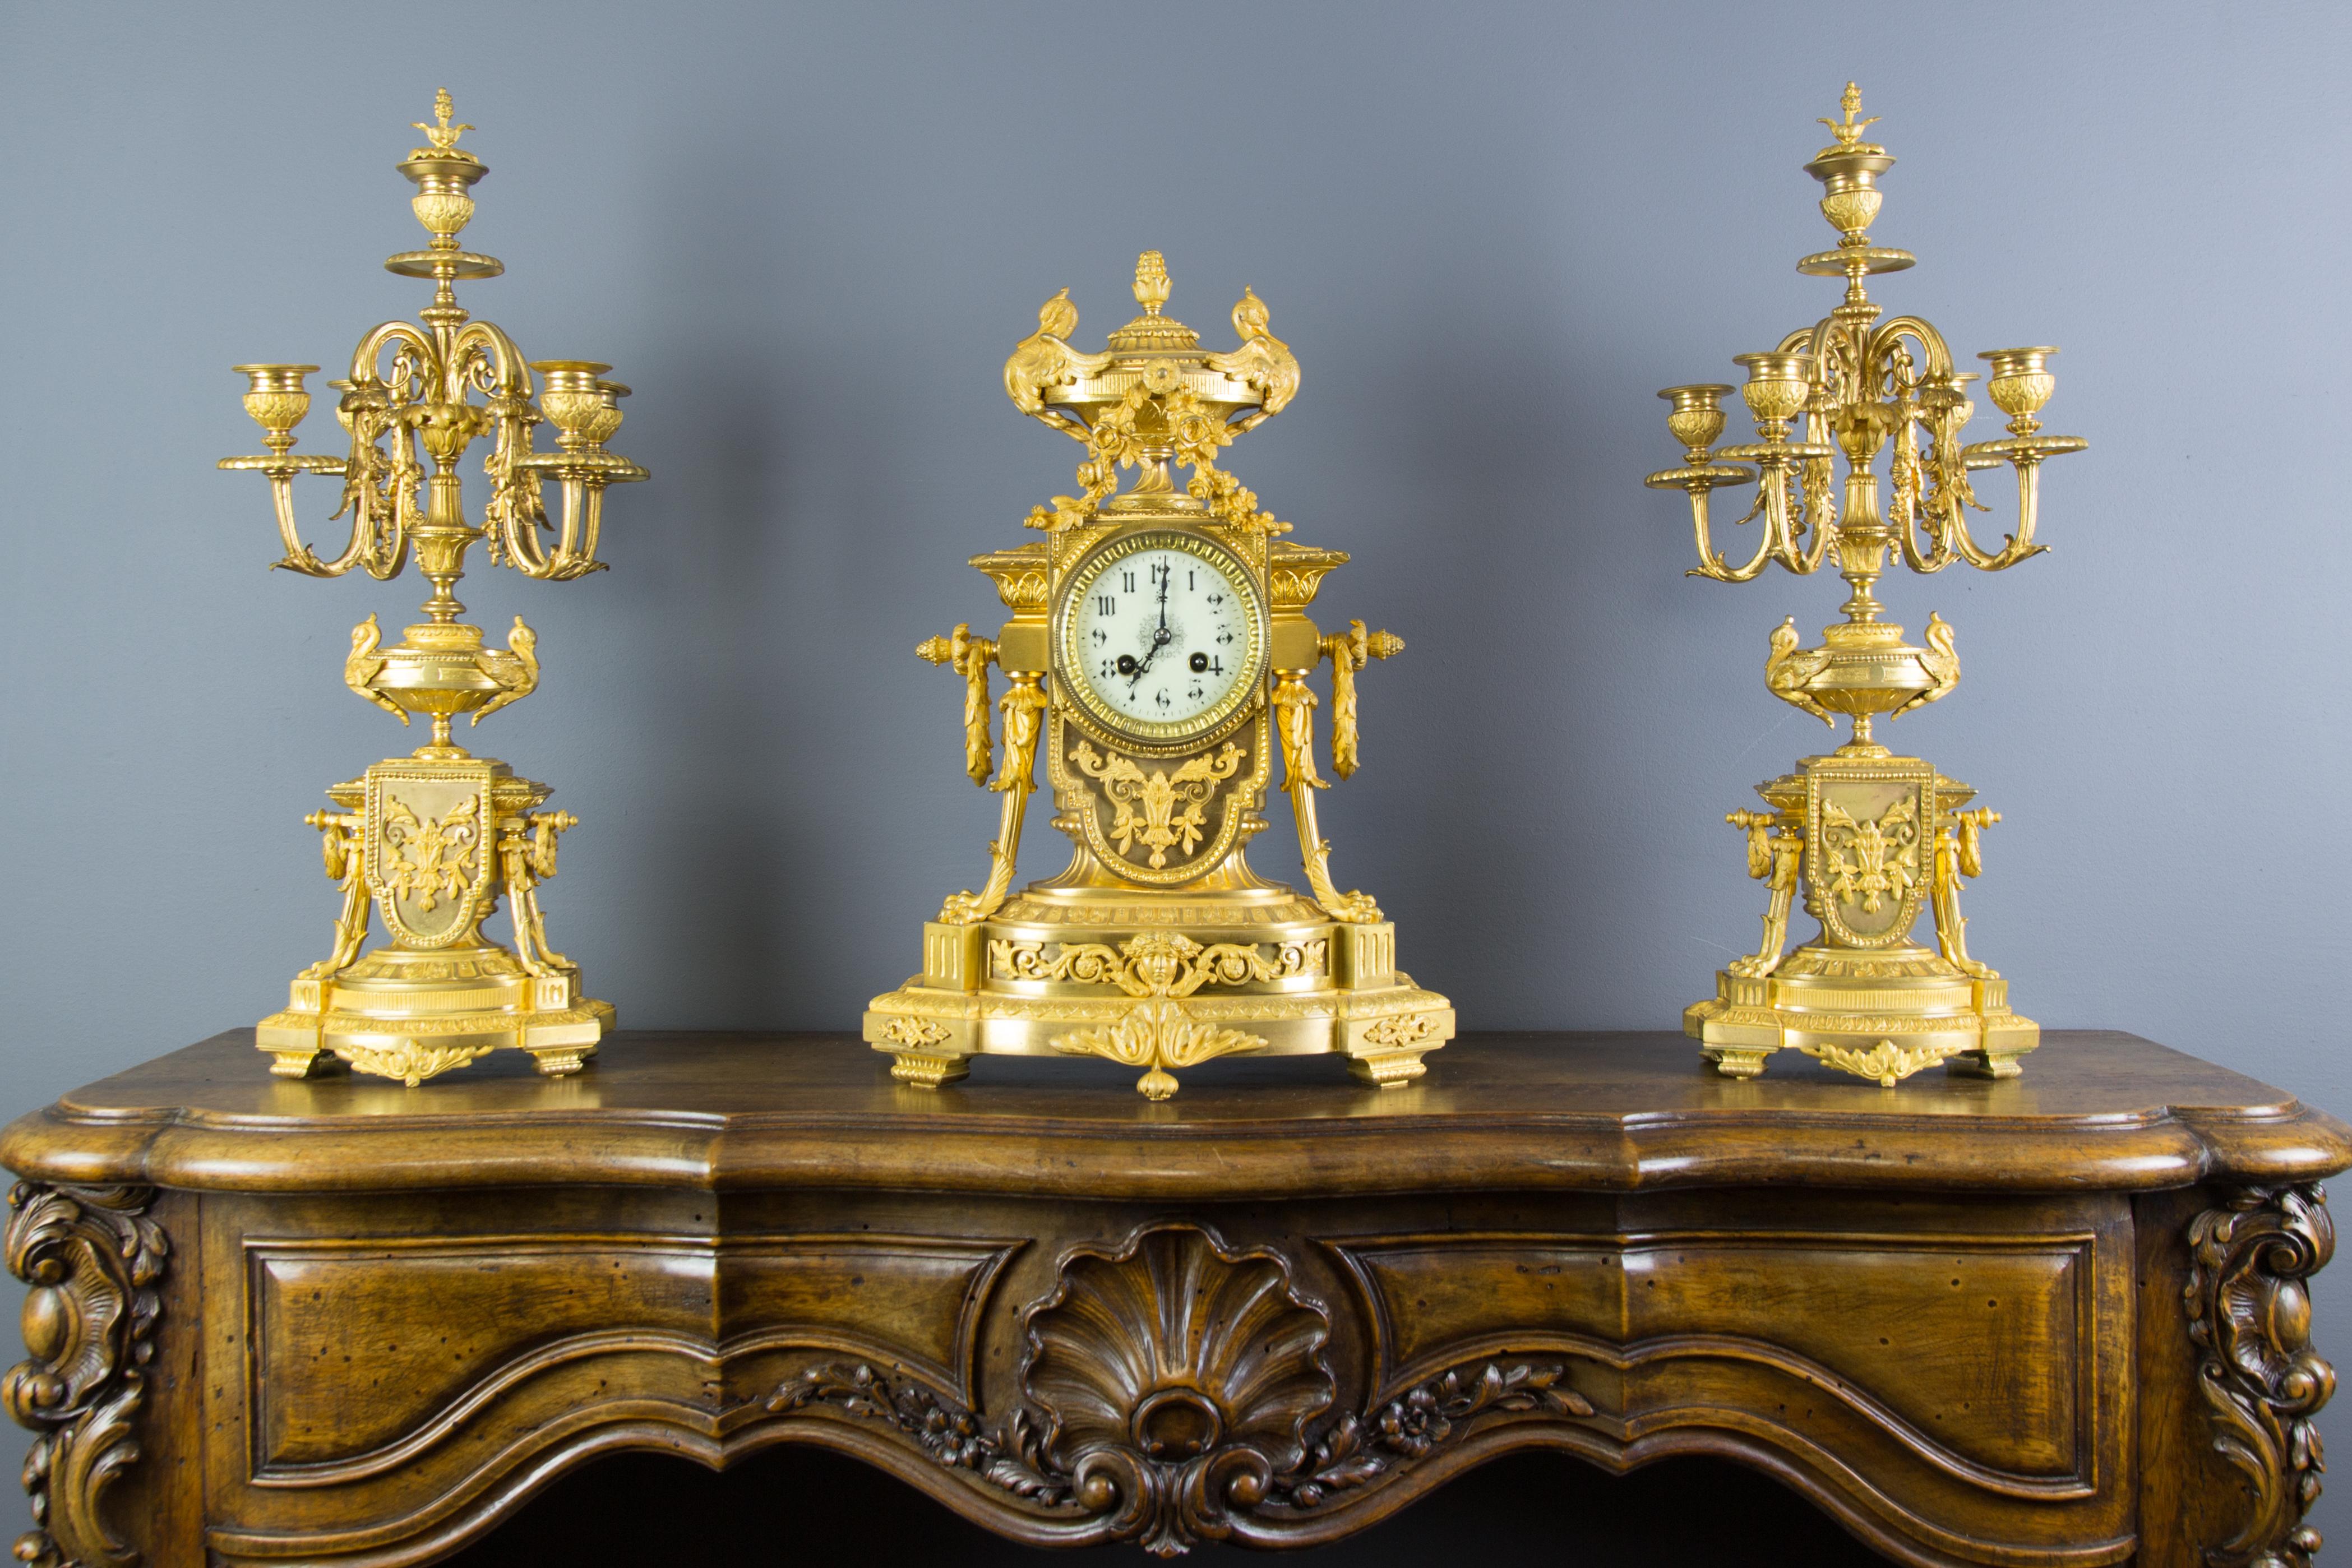 Stunning and very fine quality French late 19th century Louis XVI style gilt bronze mantel clock and a pair of five-light candelabra; the mantel clock of architectural form surmounted by urn finial, flanked by two swans. The mantel clock is centered